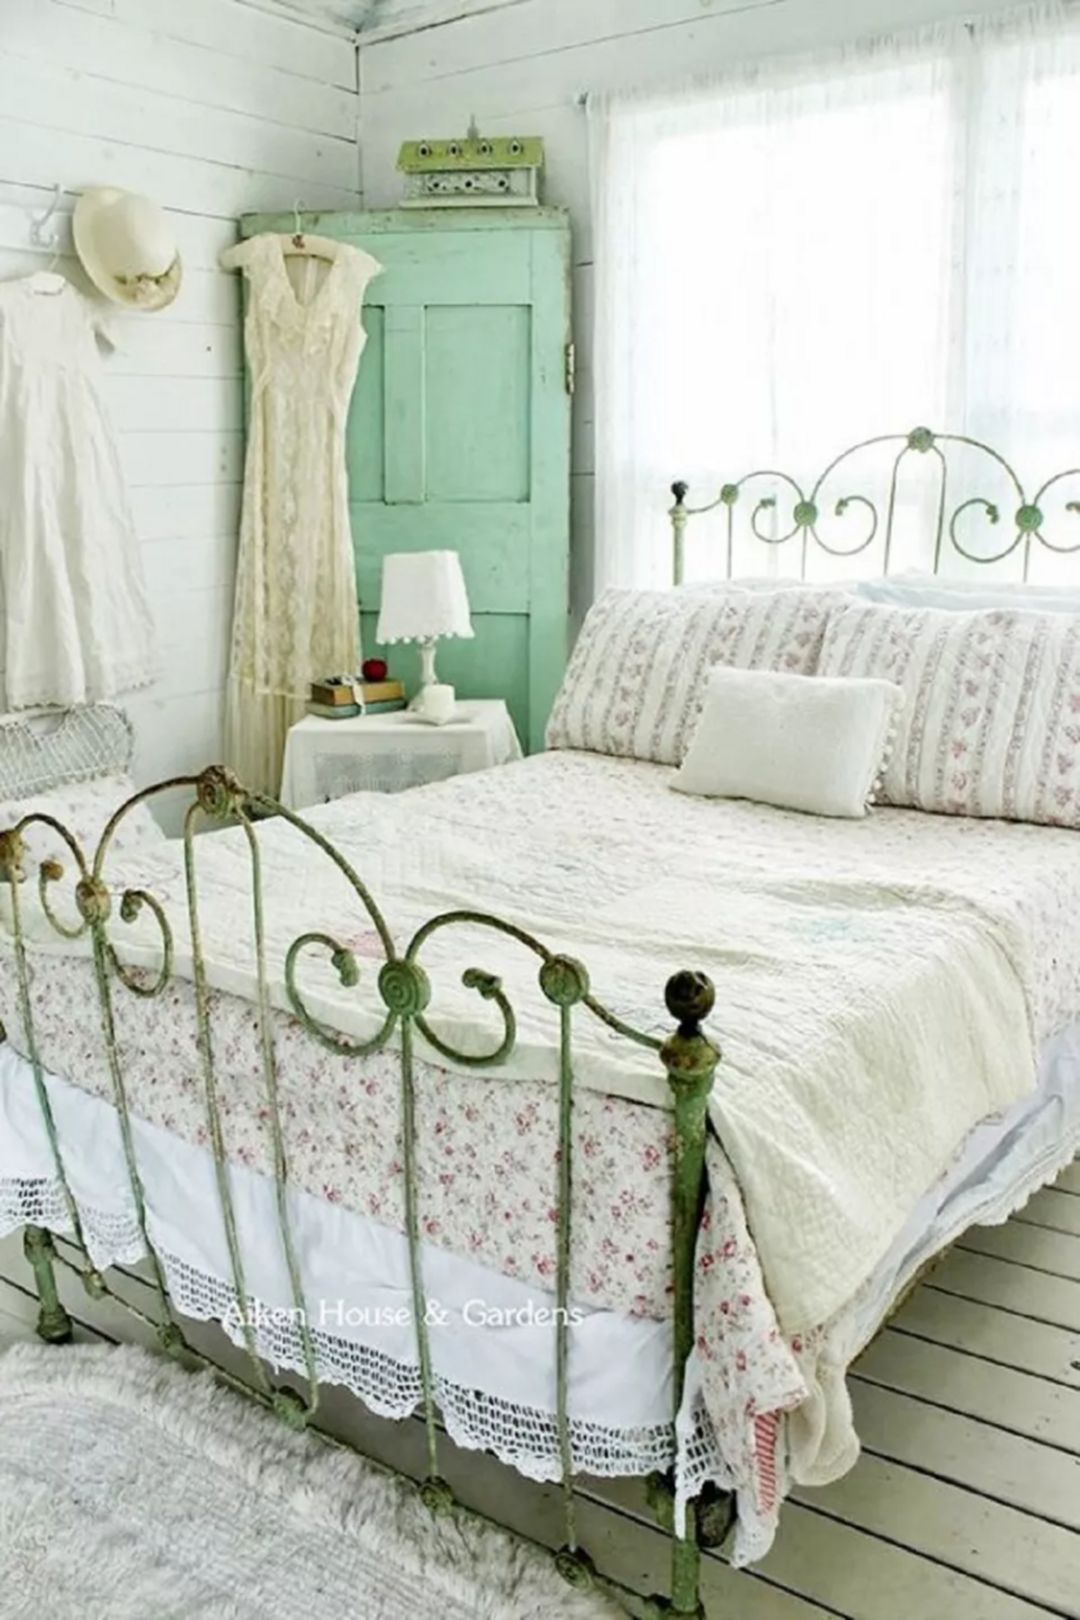 8 Best Vintage Bedroom Decorating Ideas That Are Comfortable For You To See — Design & Decorating